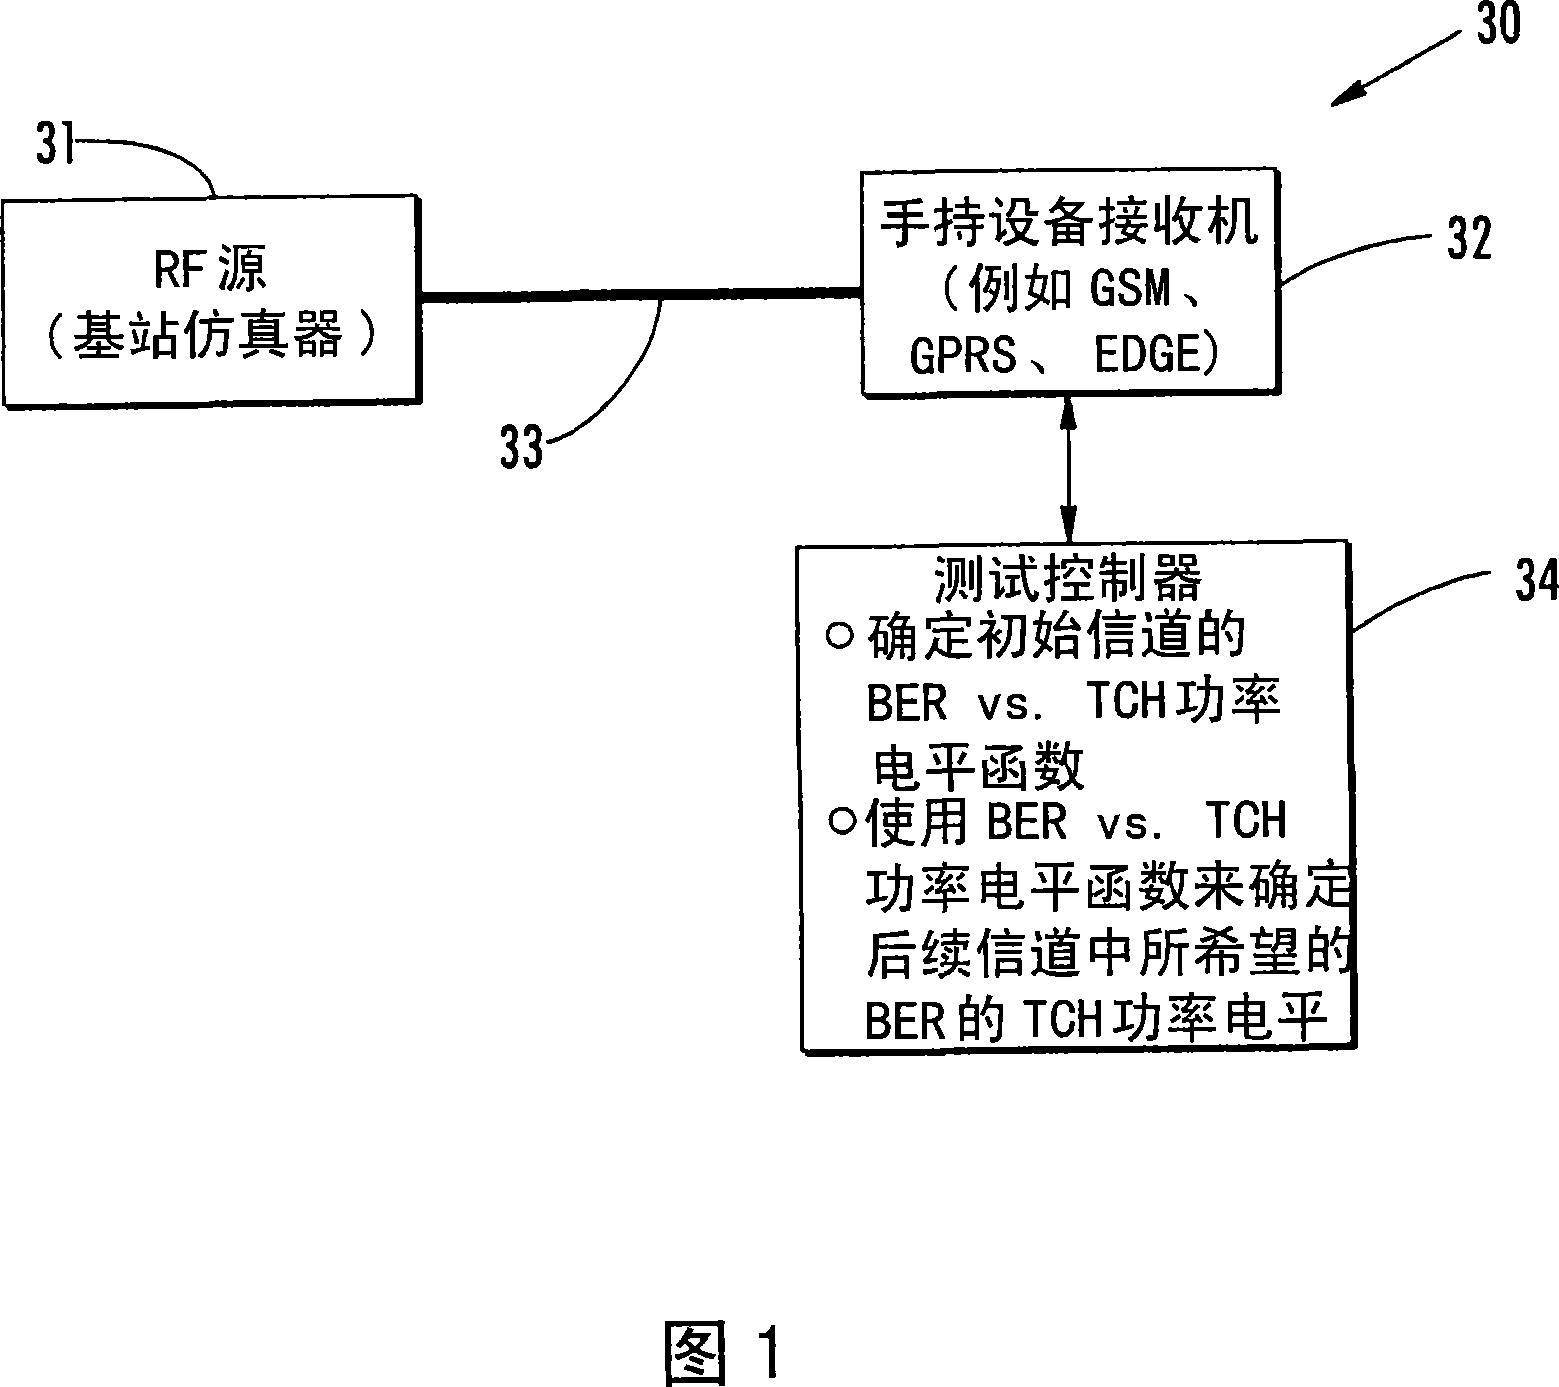 System for determining RF path loss between an RF source and an RF receiver with hysteresis and related methods